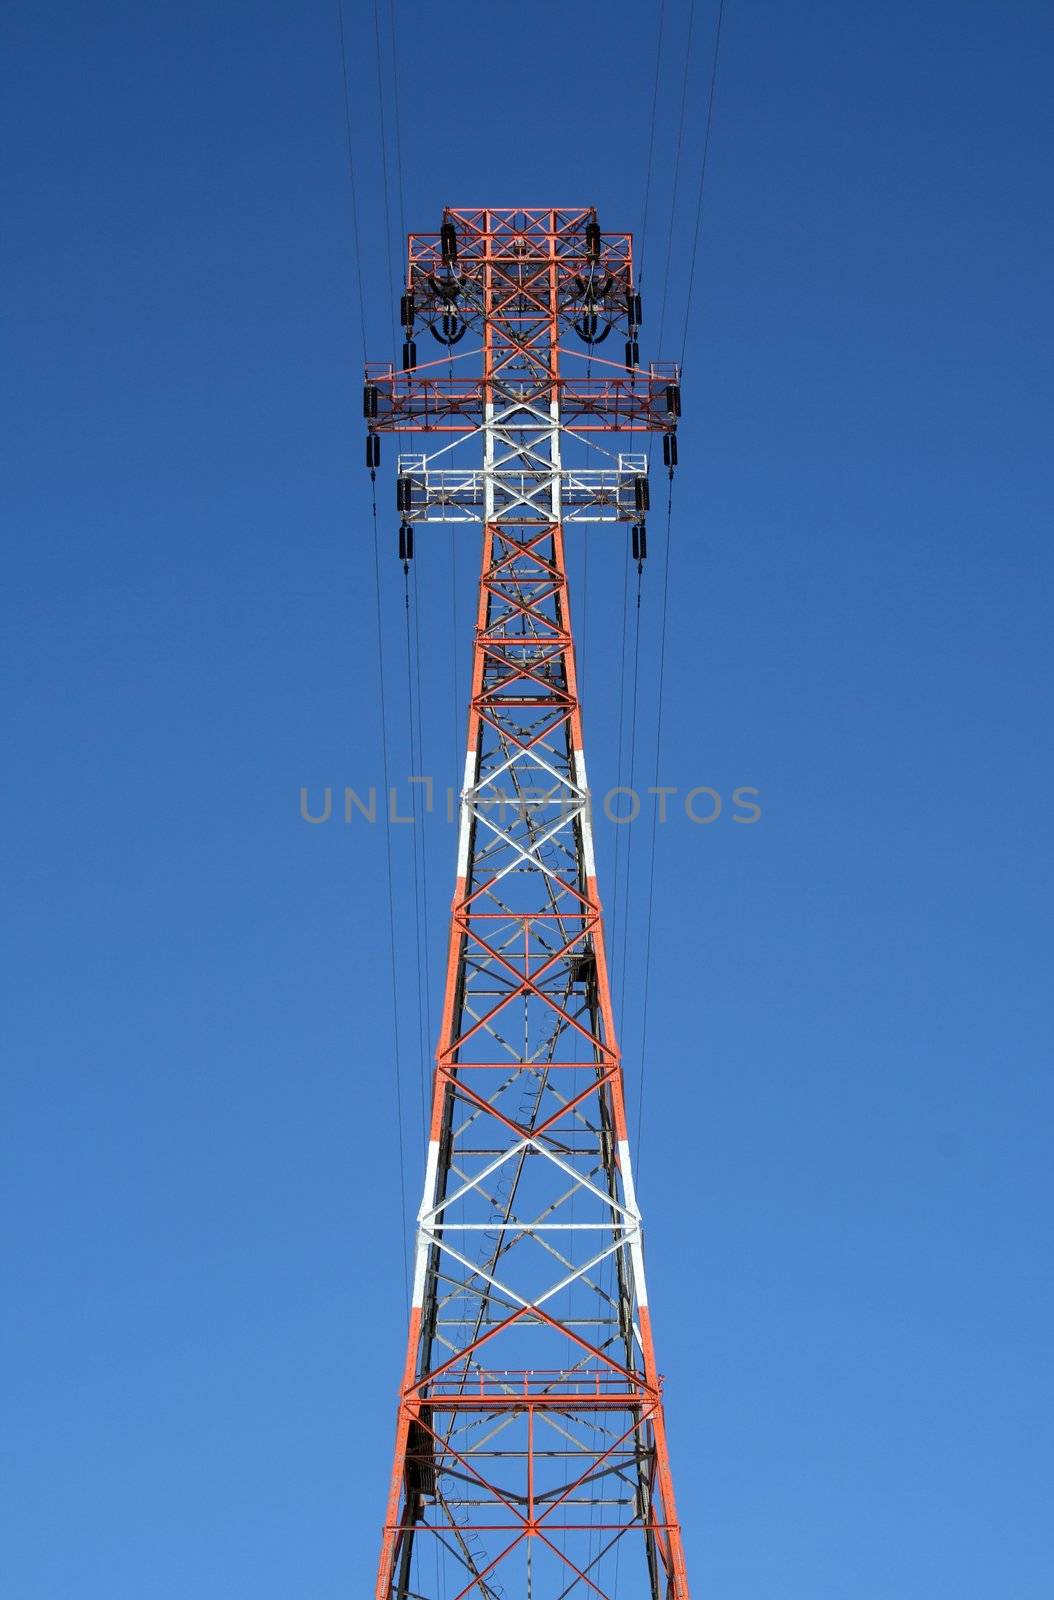 Top of the red and white high voltage power tower against the blue sky.